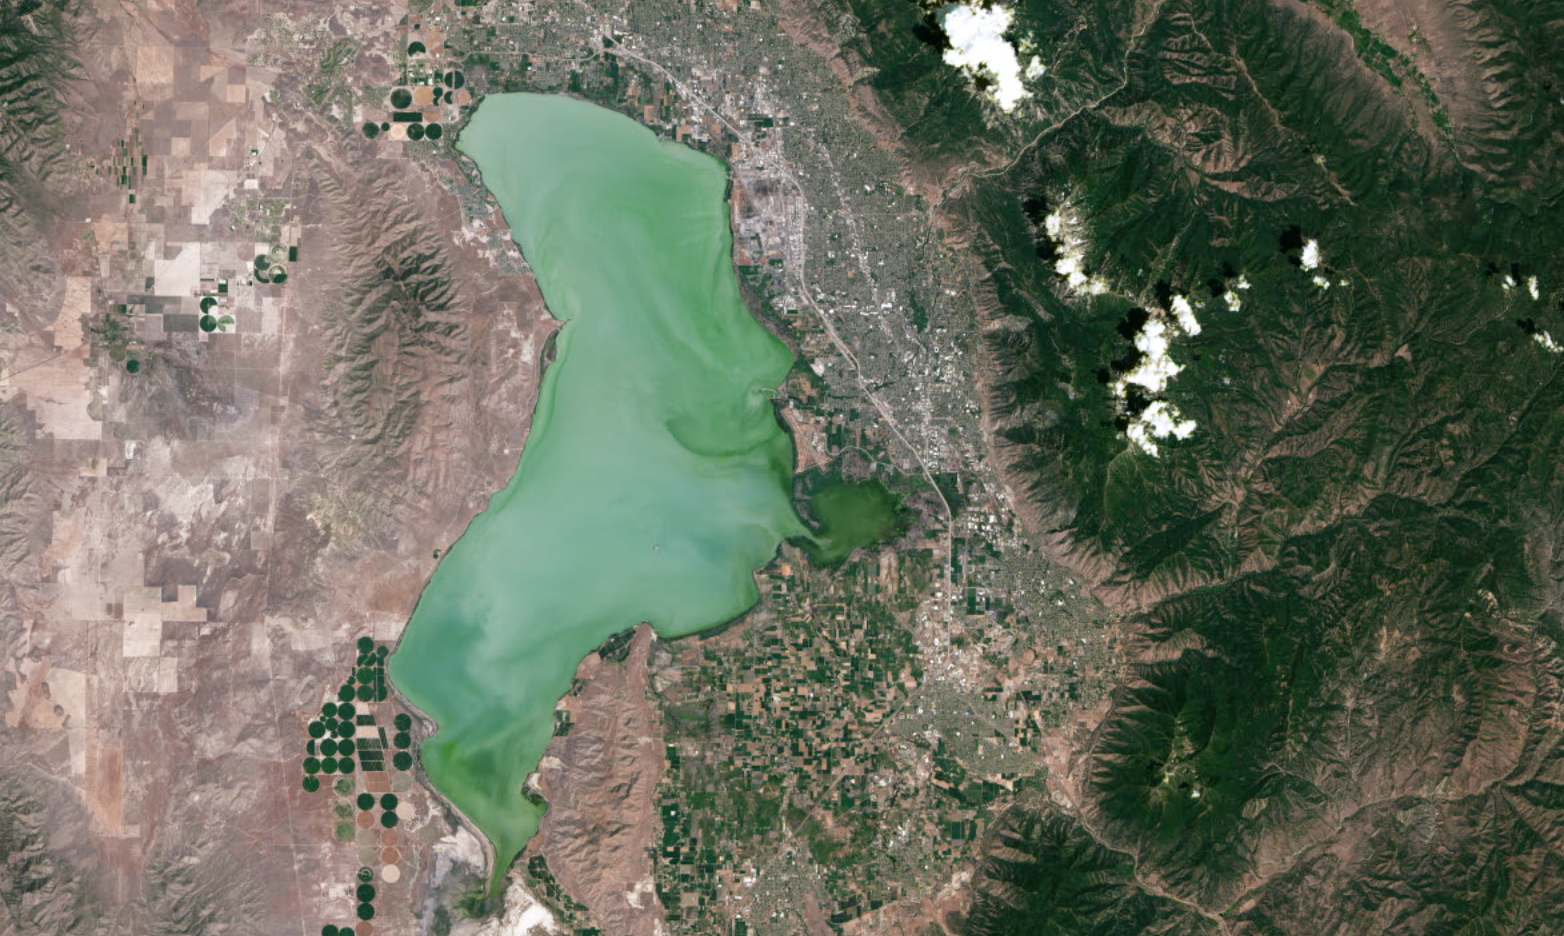 From space, satellites including the NASA and U.S. Geological Survey’s (USGS) Landsat 8 can help scientists identify lakes where an algal bloom has formed. It’s a complicated data analysis process, but one that researchers are automating so resource managers around the country can use the satellite data to identify potential problems.Music: Light From Dark by Adam Salkedi, Neil Pollard [PRS], published by Atmosphere Music Ltd.; Experimental Design by Laurent Dury [SACEM], published by Koka Media; Against The Wall by Benjamin Peter McAvoy [PRS], published by Sound Pocket Music; Brainstorming by Laurent Dury[SACEM], published by Koka Media; Together As One by Le Fat Club [SACEM], Olivier Grim [SACEM]; published by Koka Media.Complete transcript available.Watch this video on the NASA Goddard YouTube channel.